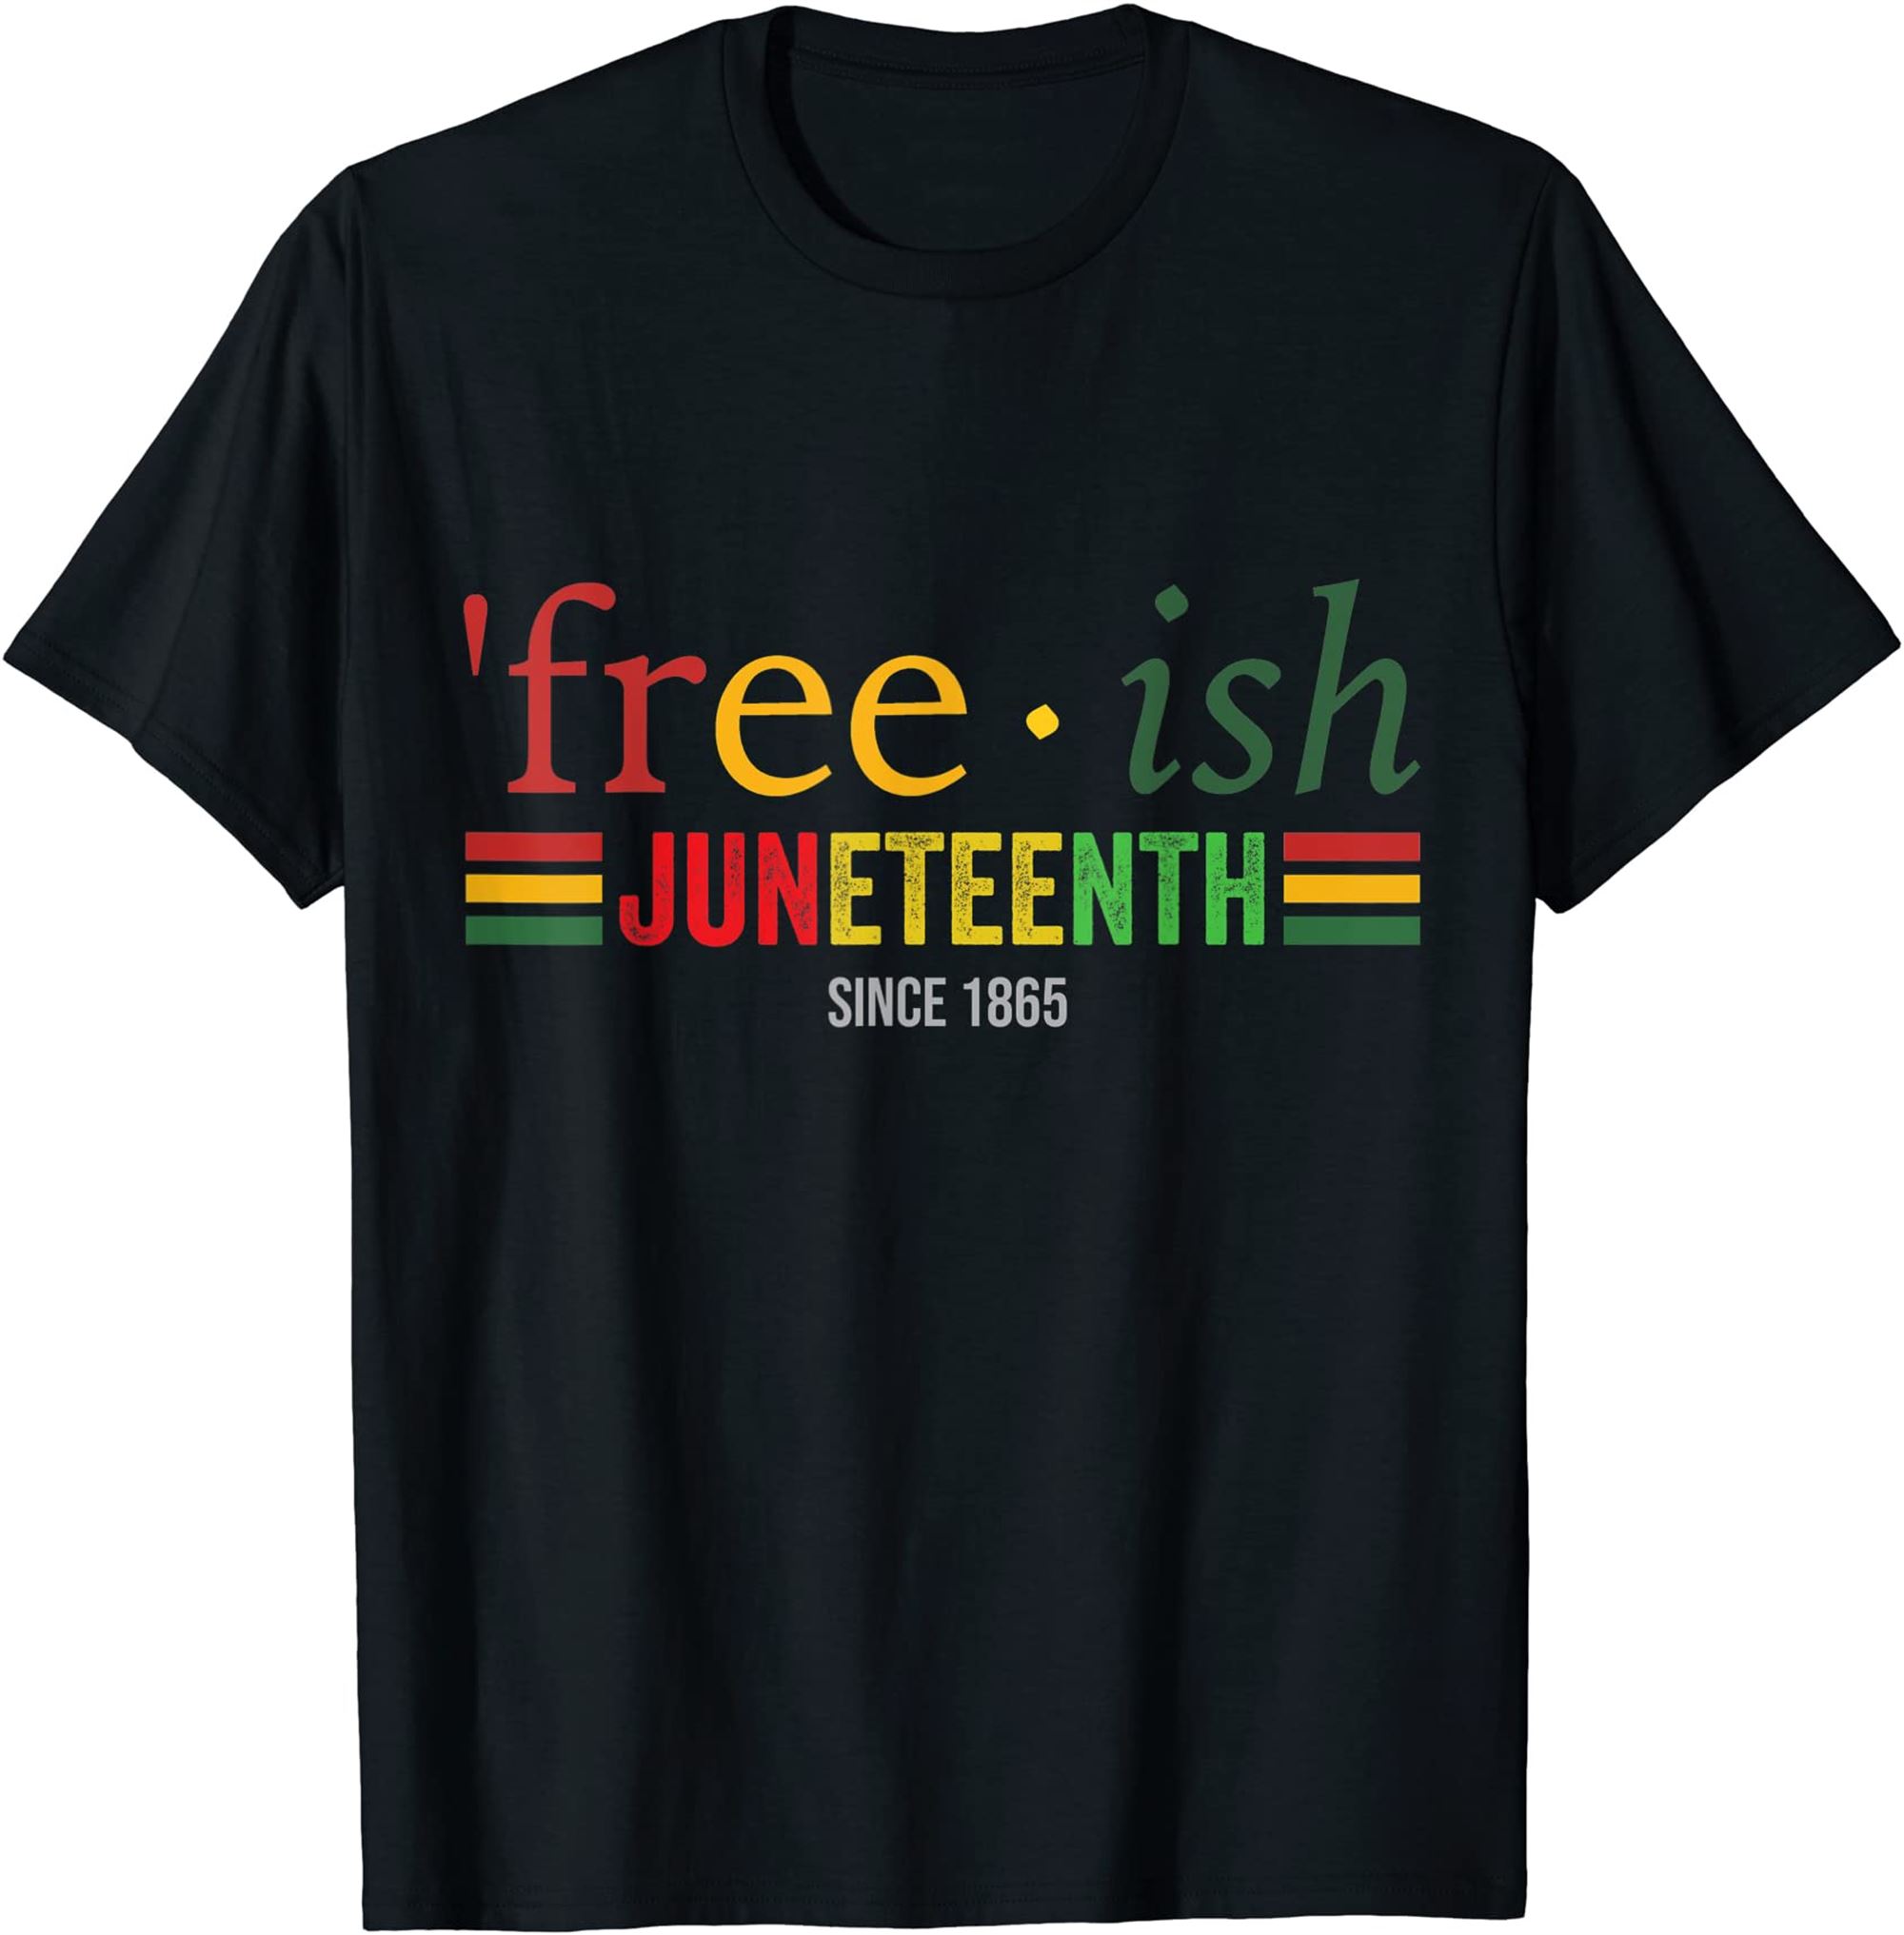 Free Ish Since 1865 Pan African Flag For Juneteenth Tshirt Full Size Up To 5xl